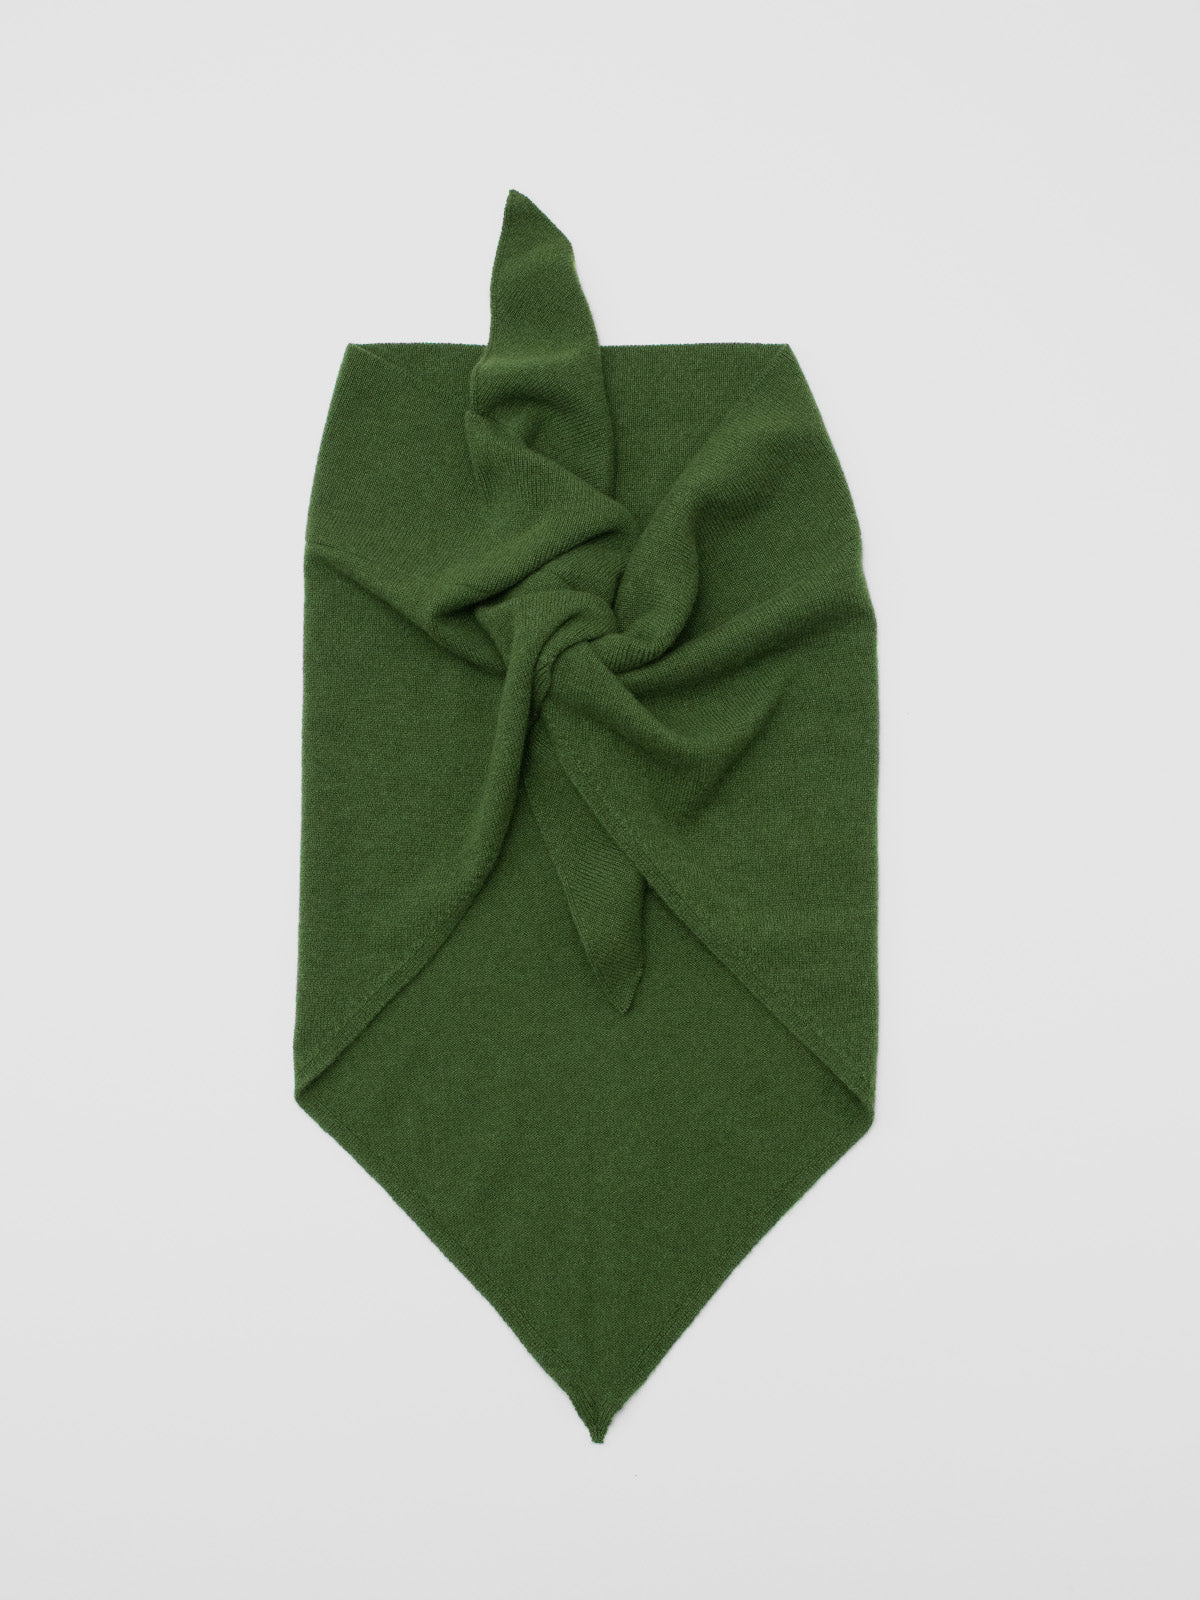 WILLOW / CASHMERE SCARF / UNI GREEN